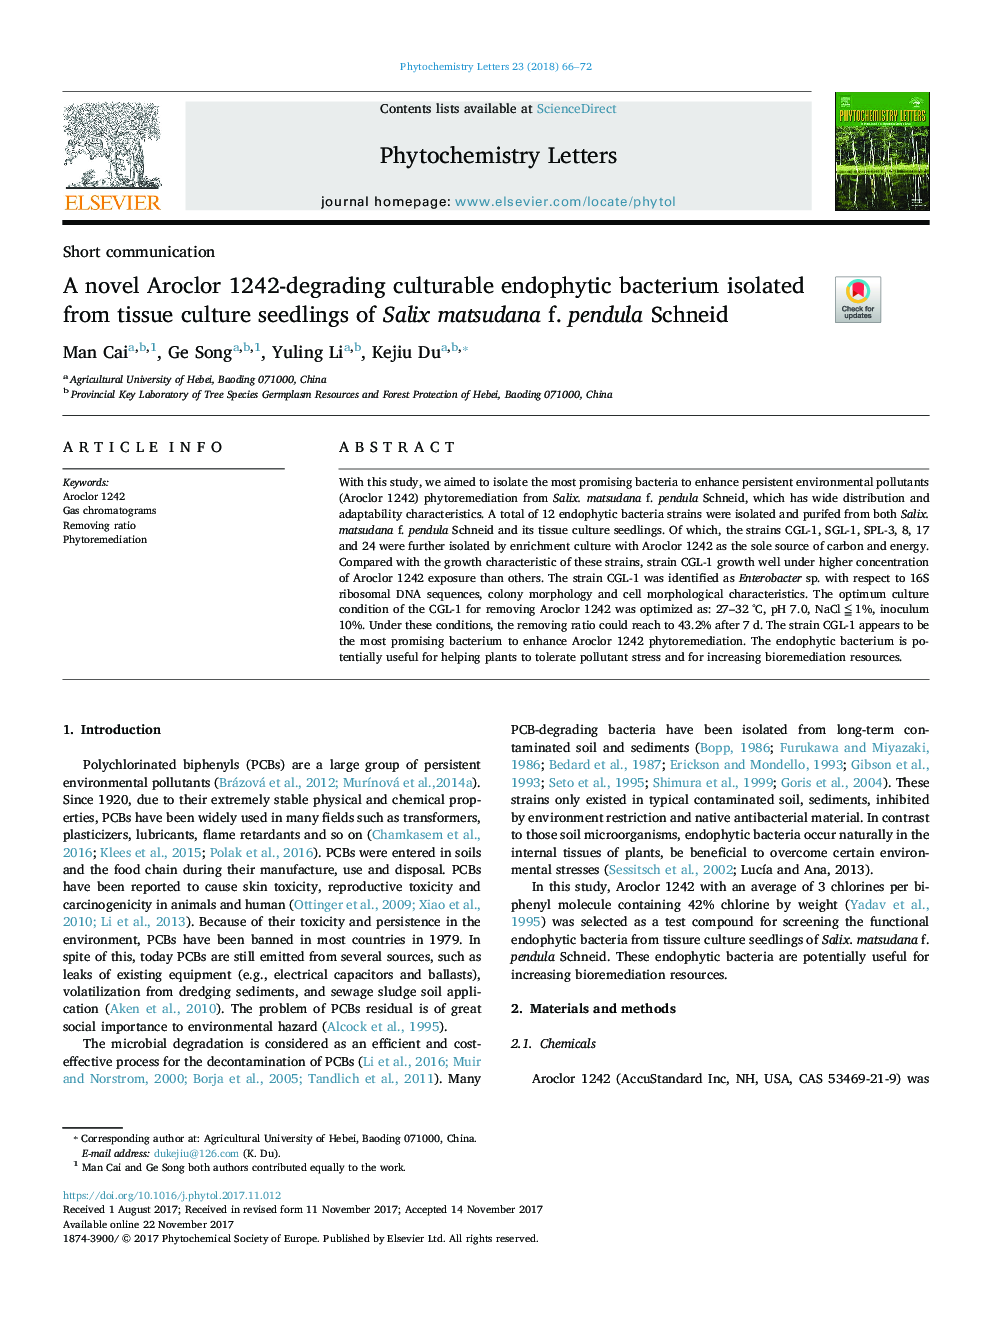 A novel Aroclor 1242-degrading culturable endophytic bacterium isolated from tissue culture seedlings of Salix matsudana f. pendula Schneid